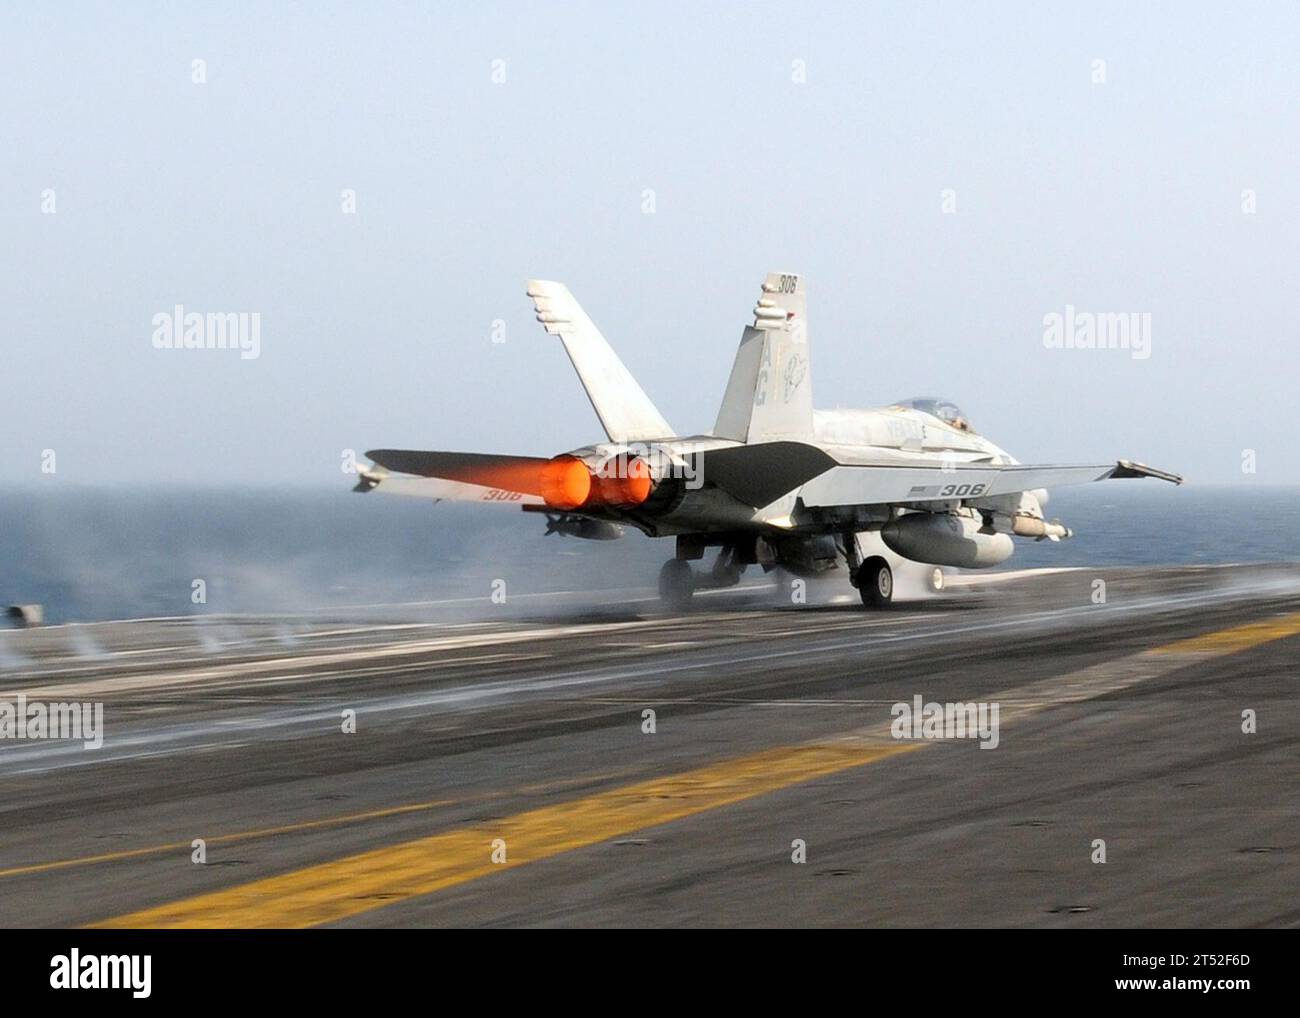 1006014236E-452 NORTH ARABIAN SEA (June 1, 2010) An F/A-18C Hornet assigned to the Rampagers of Strike Fighter Squadron (VFA) 83 catapults from the flight deck of aircraft carrier USS Dwight D. Eisenhower (CVN 69). The Eisenhower Carrier Strike Group is deployed as part of an on-going rotation of forward-deployed forces to support maritime security operations in the U.S. 5th Fleet area of responsibility. Navy Stock Photo